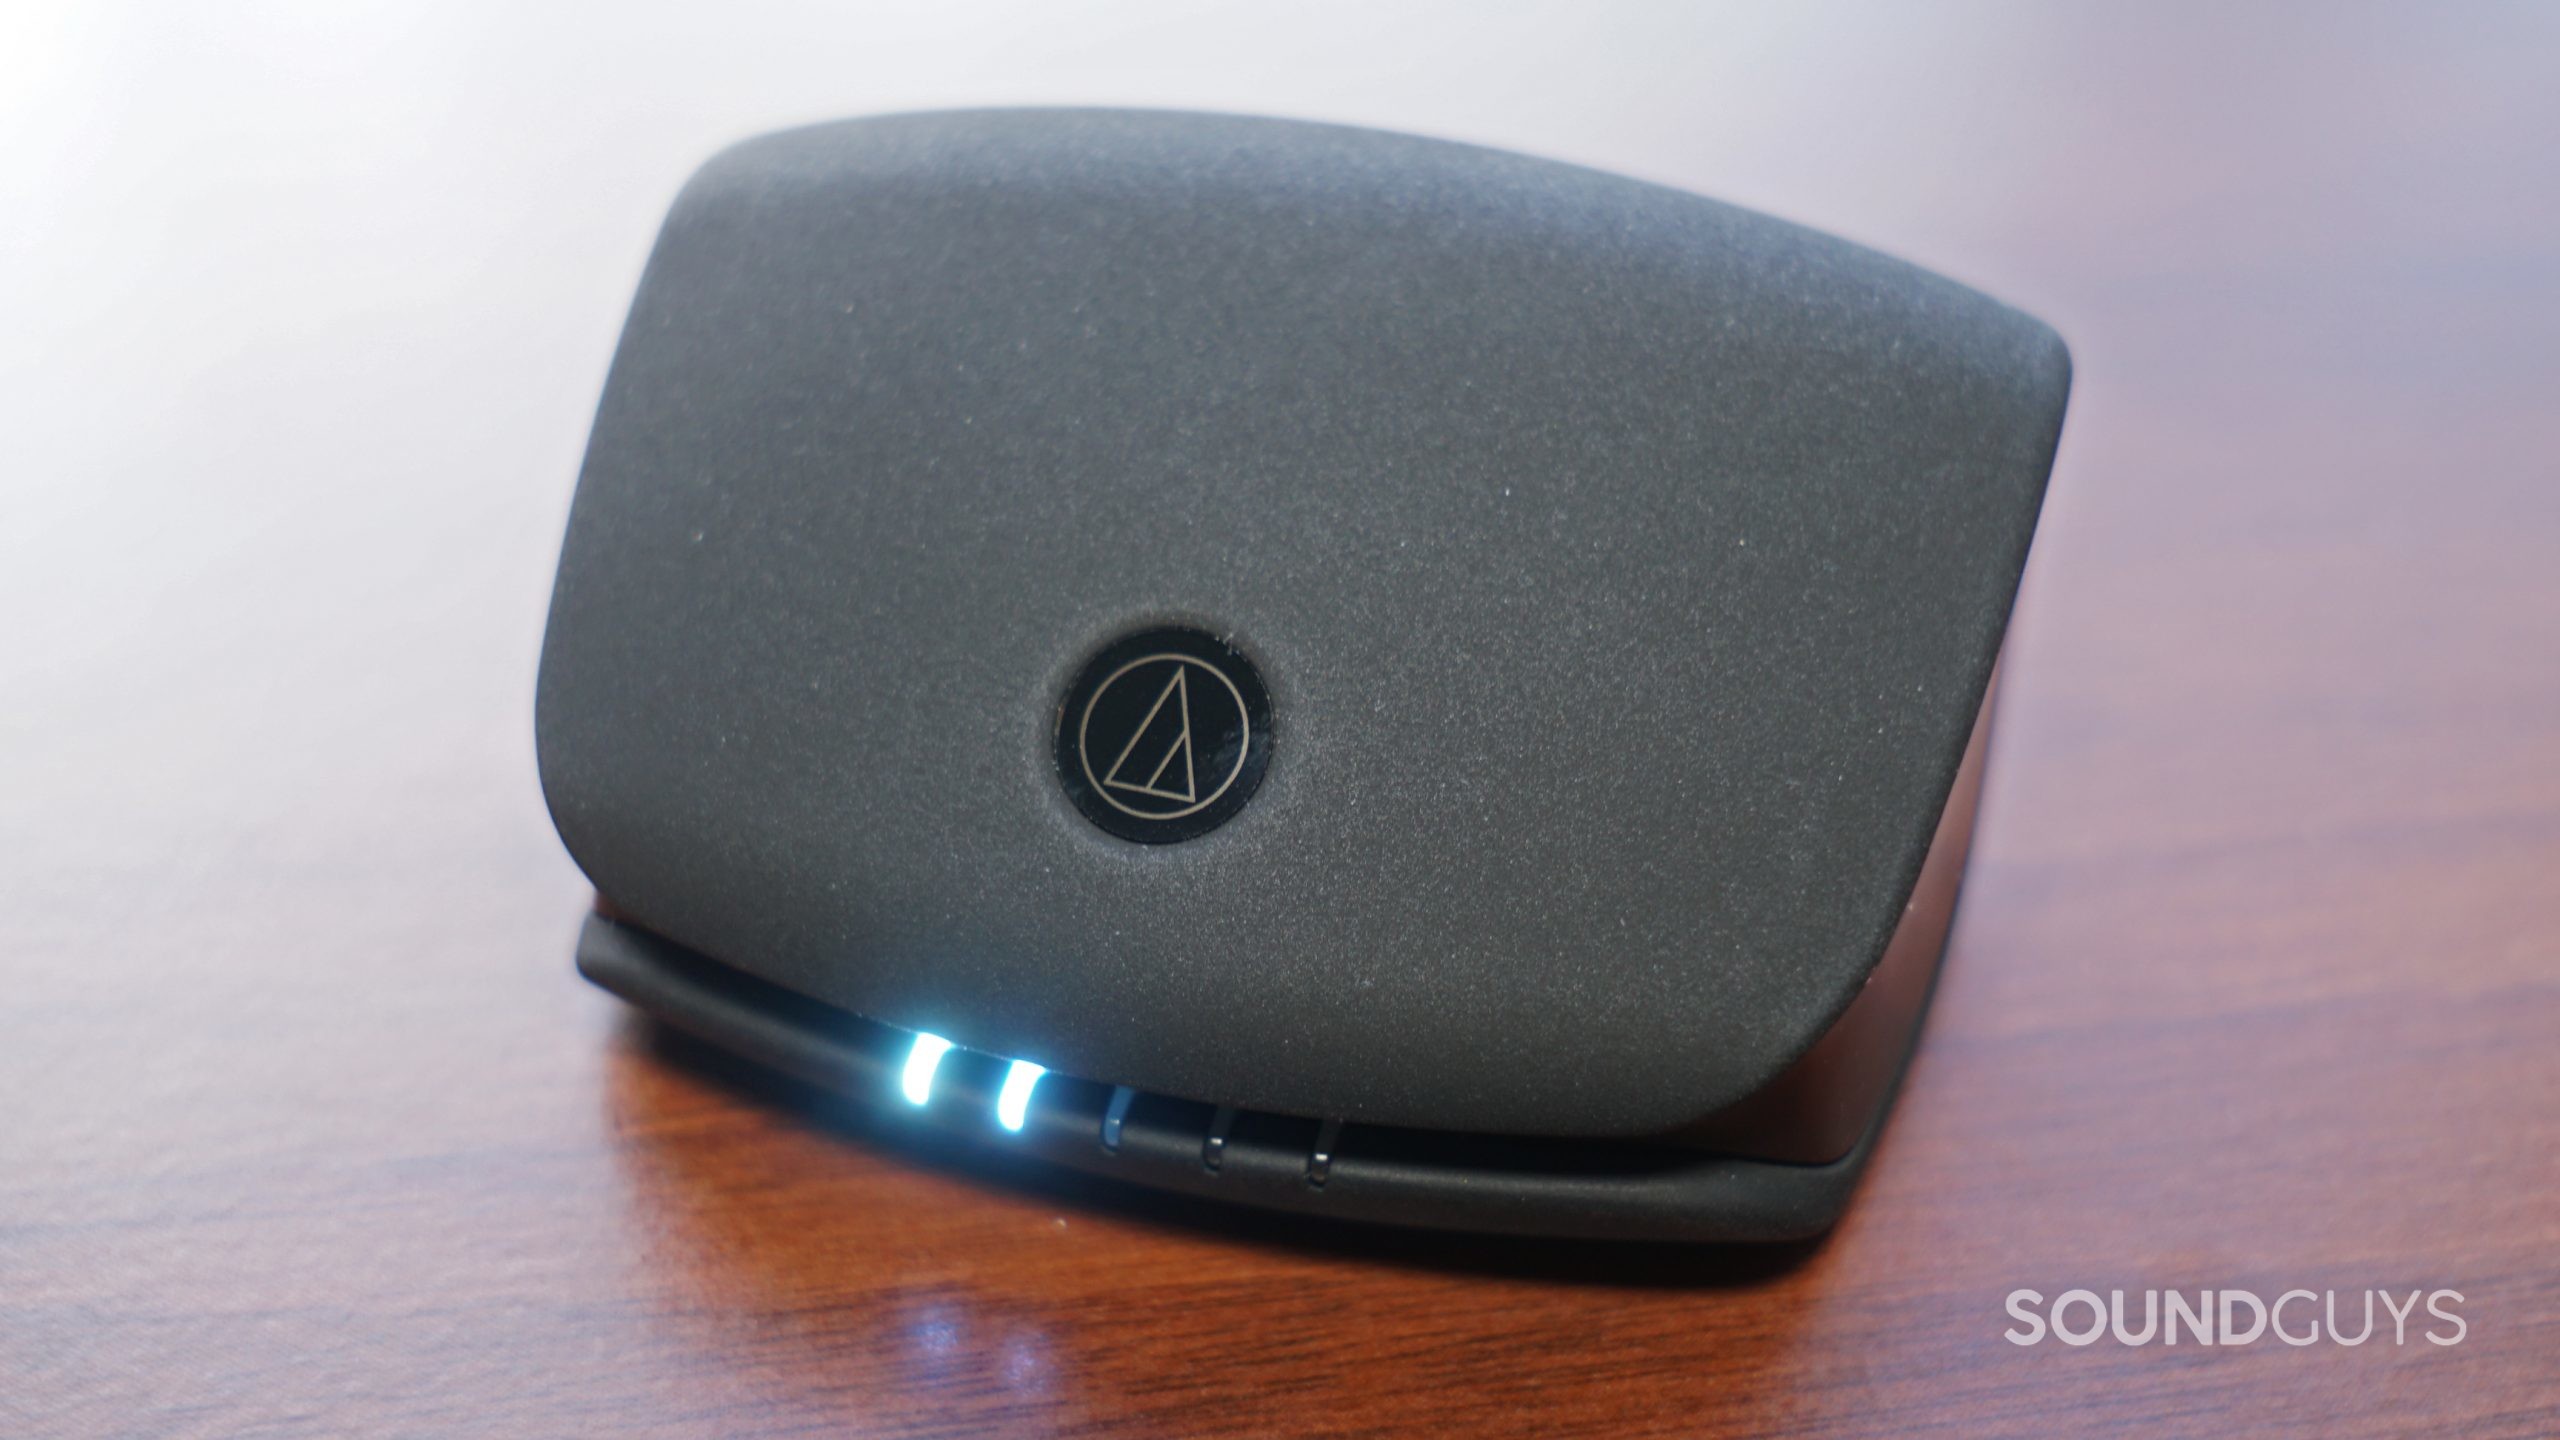 The Audio-Technica ATH-TWX9 charging case sits on a wooden surface.